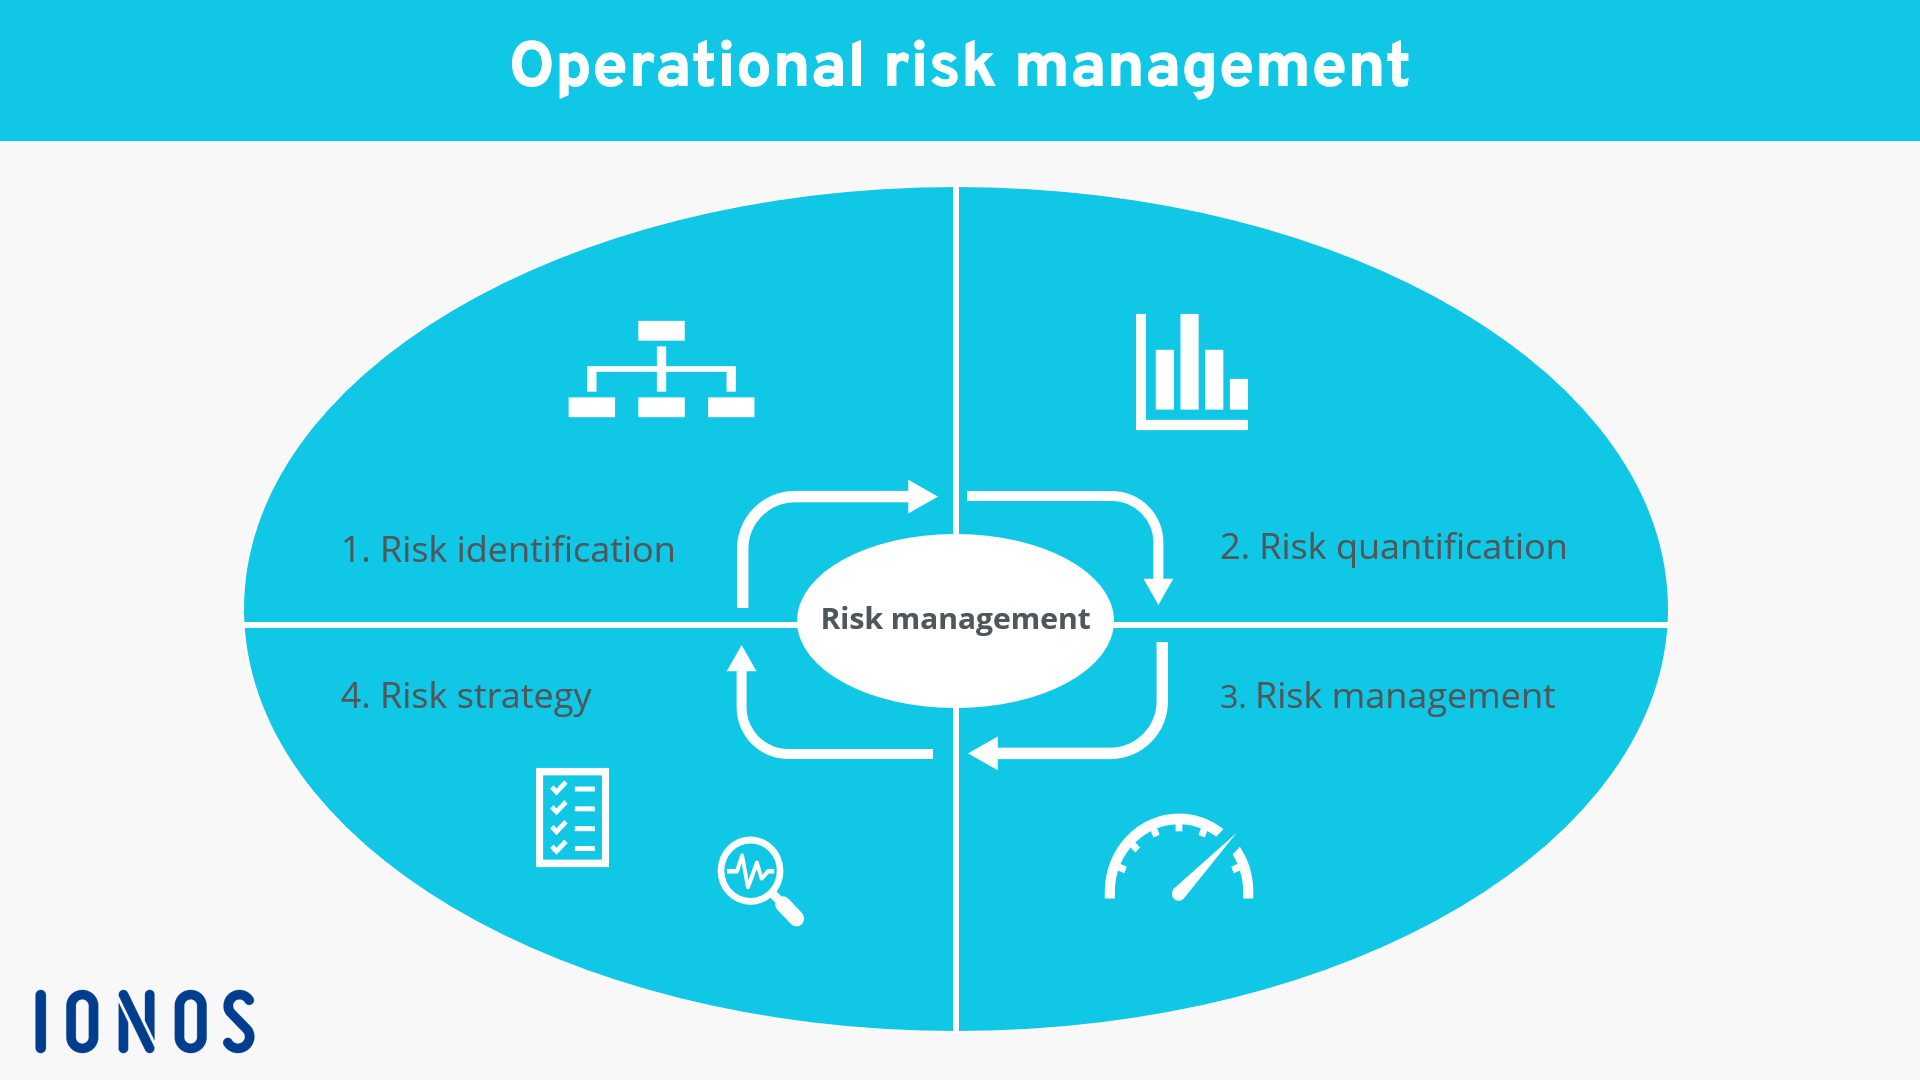 The four phases of operational risk management